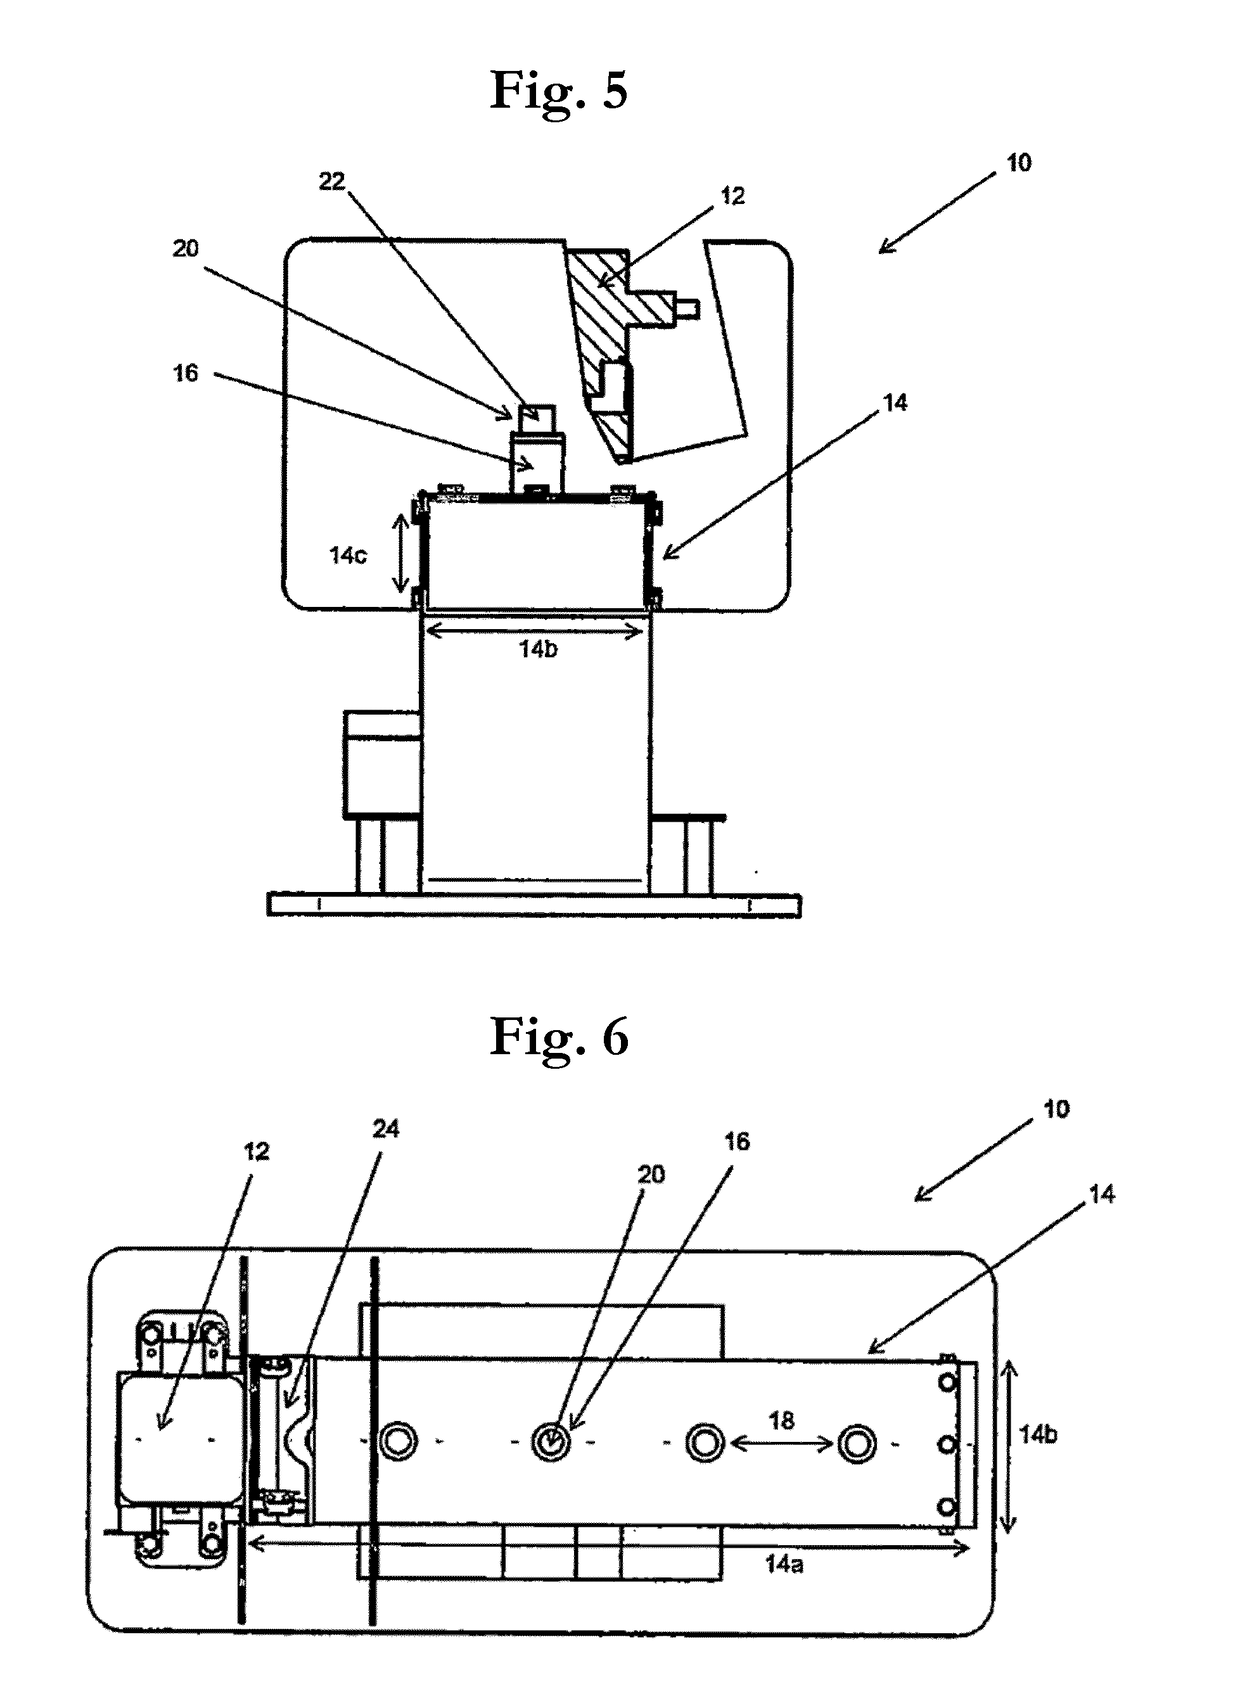 Apparatus and method for converting electromagnetic radiation into thermal energy